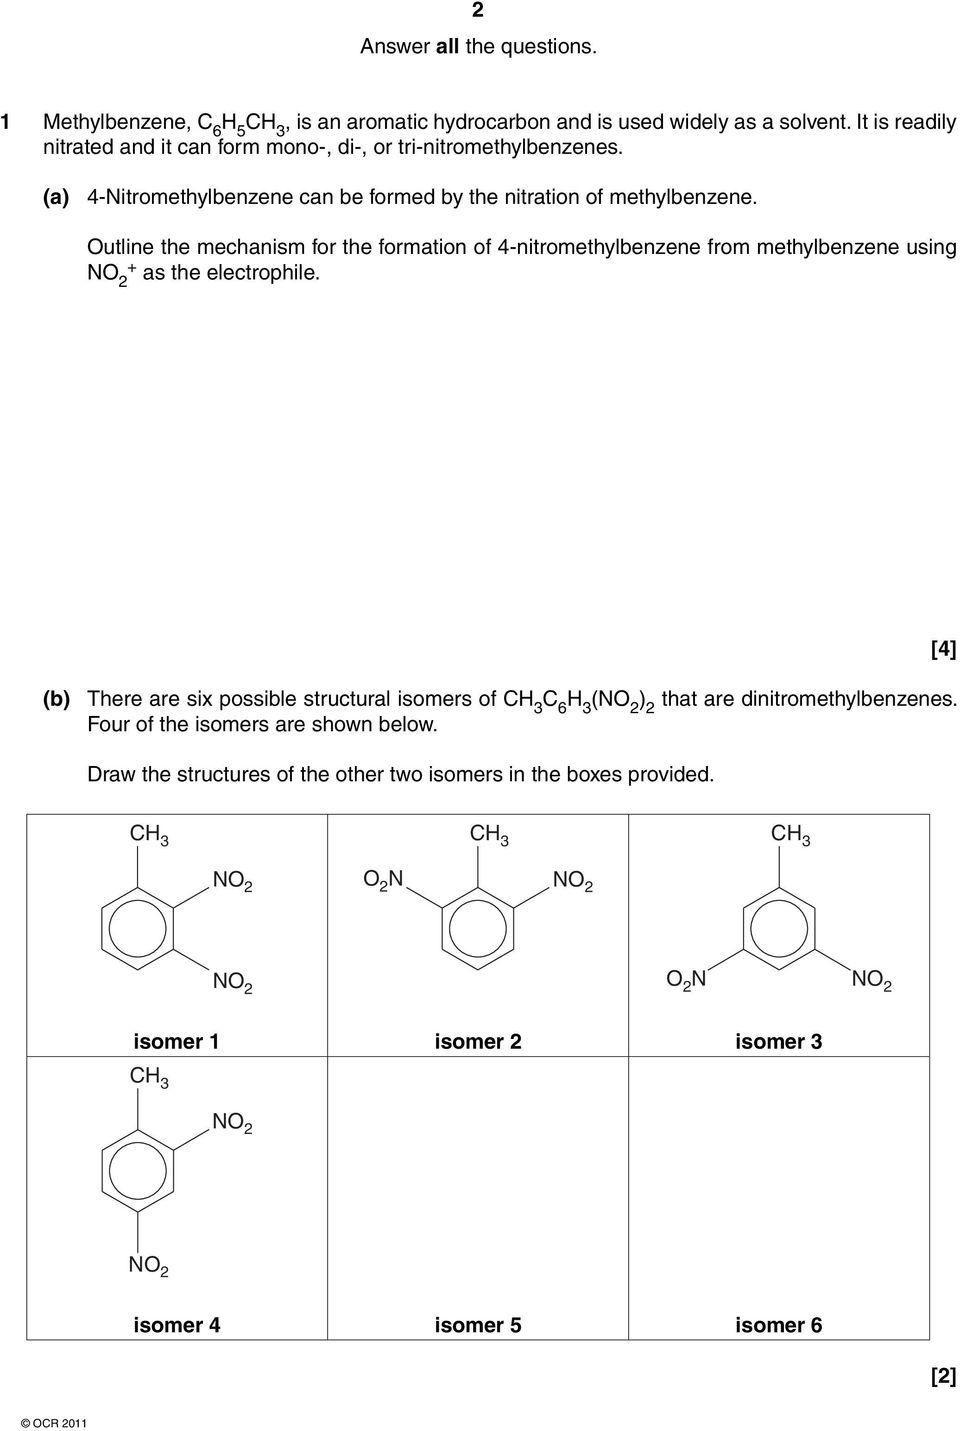 utline the mechanism for the formation of 4-nitromethylbenzene from methylbenzene using N 2 + as the electrophile.